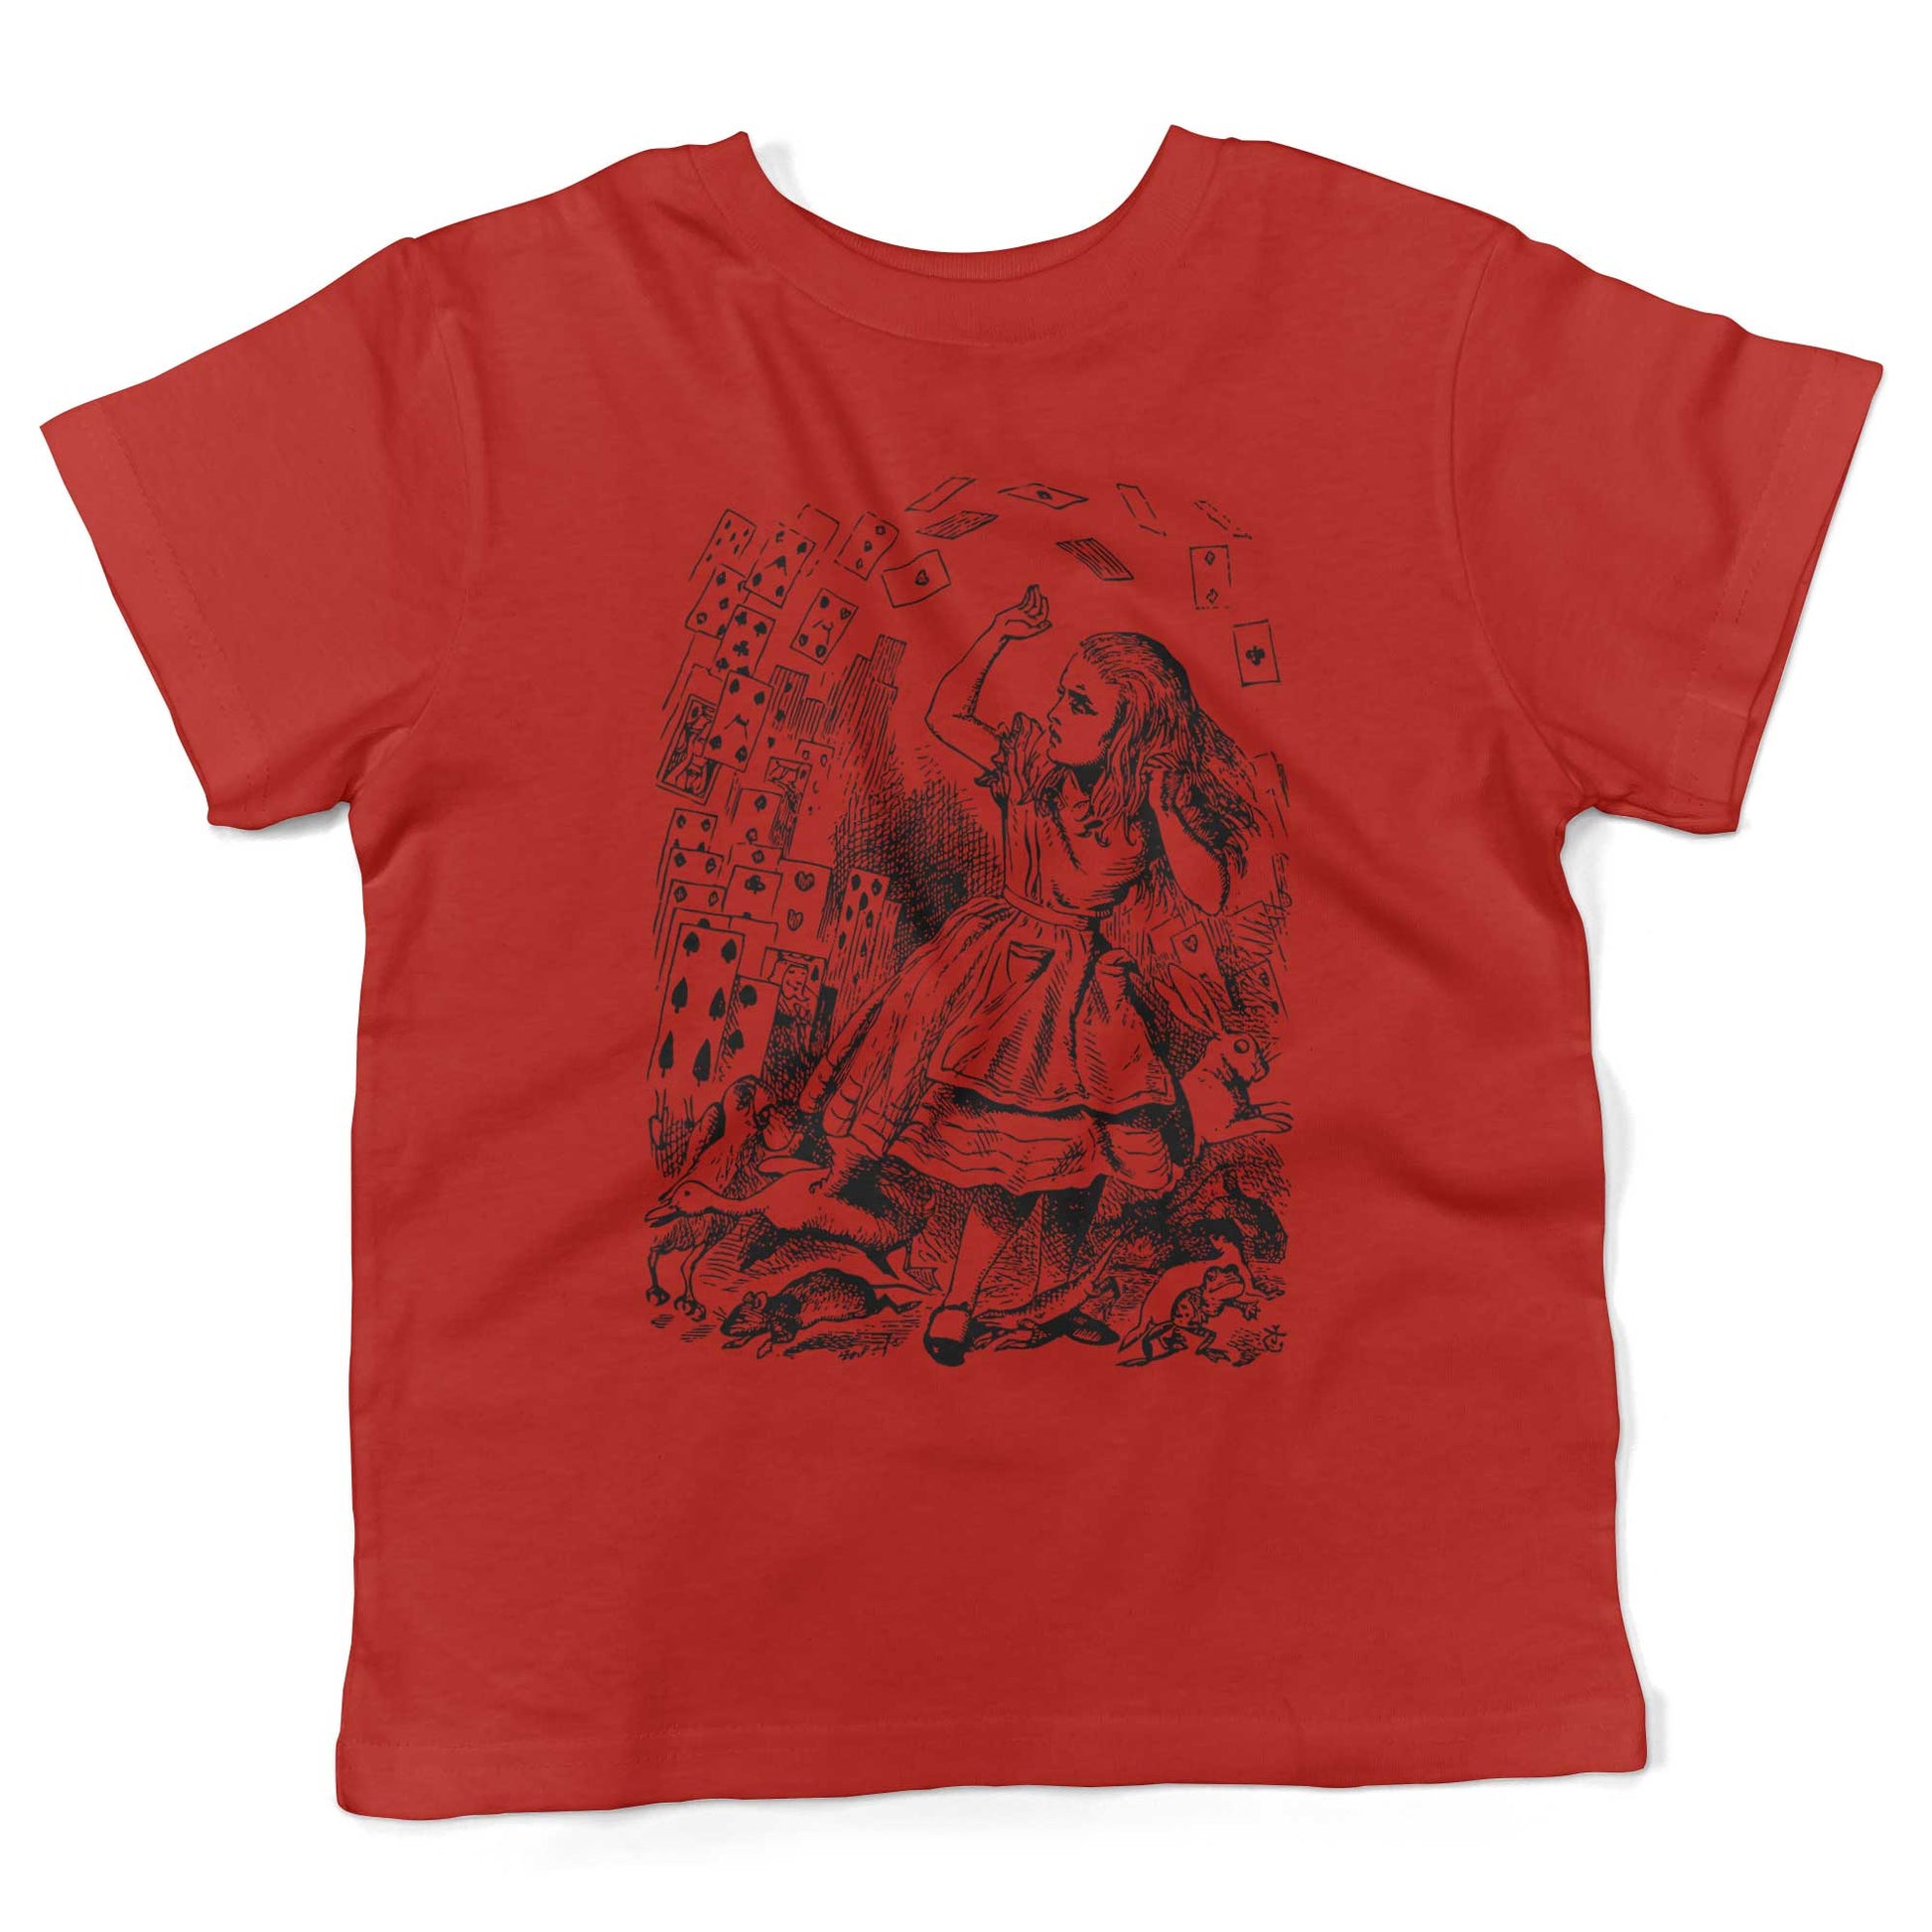 Alice In Wonderland Playing Cards Toddler Shirt-Red-2T